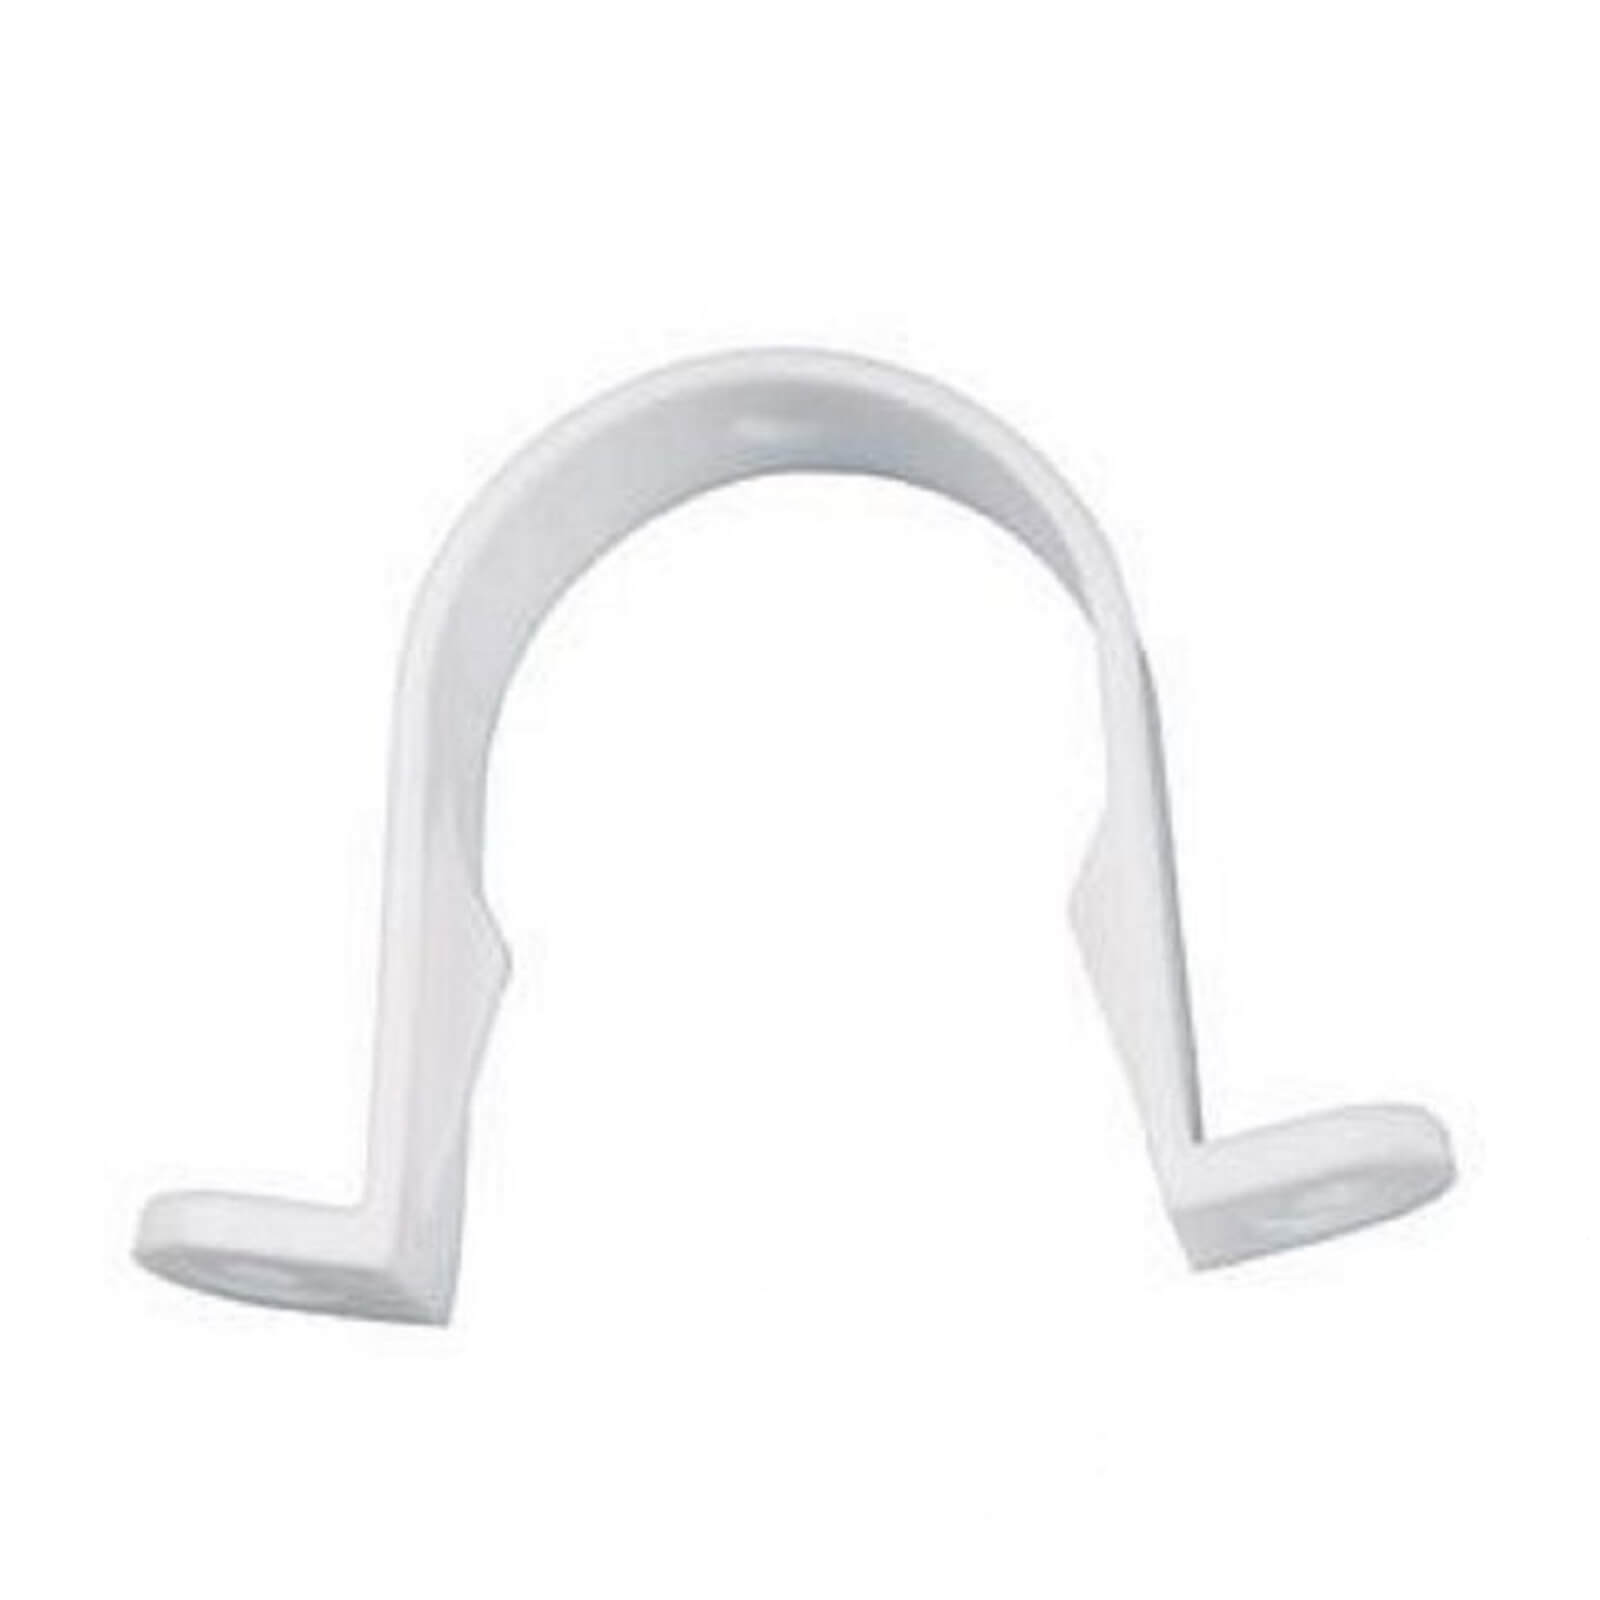 Waste Pipeclip - 40mm - White